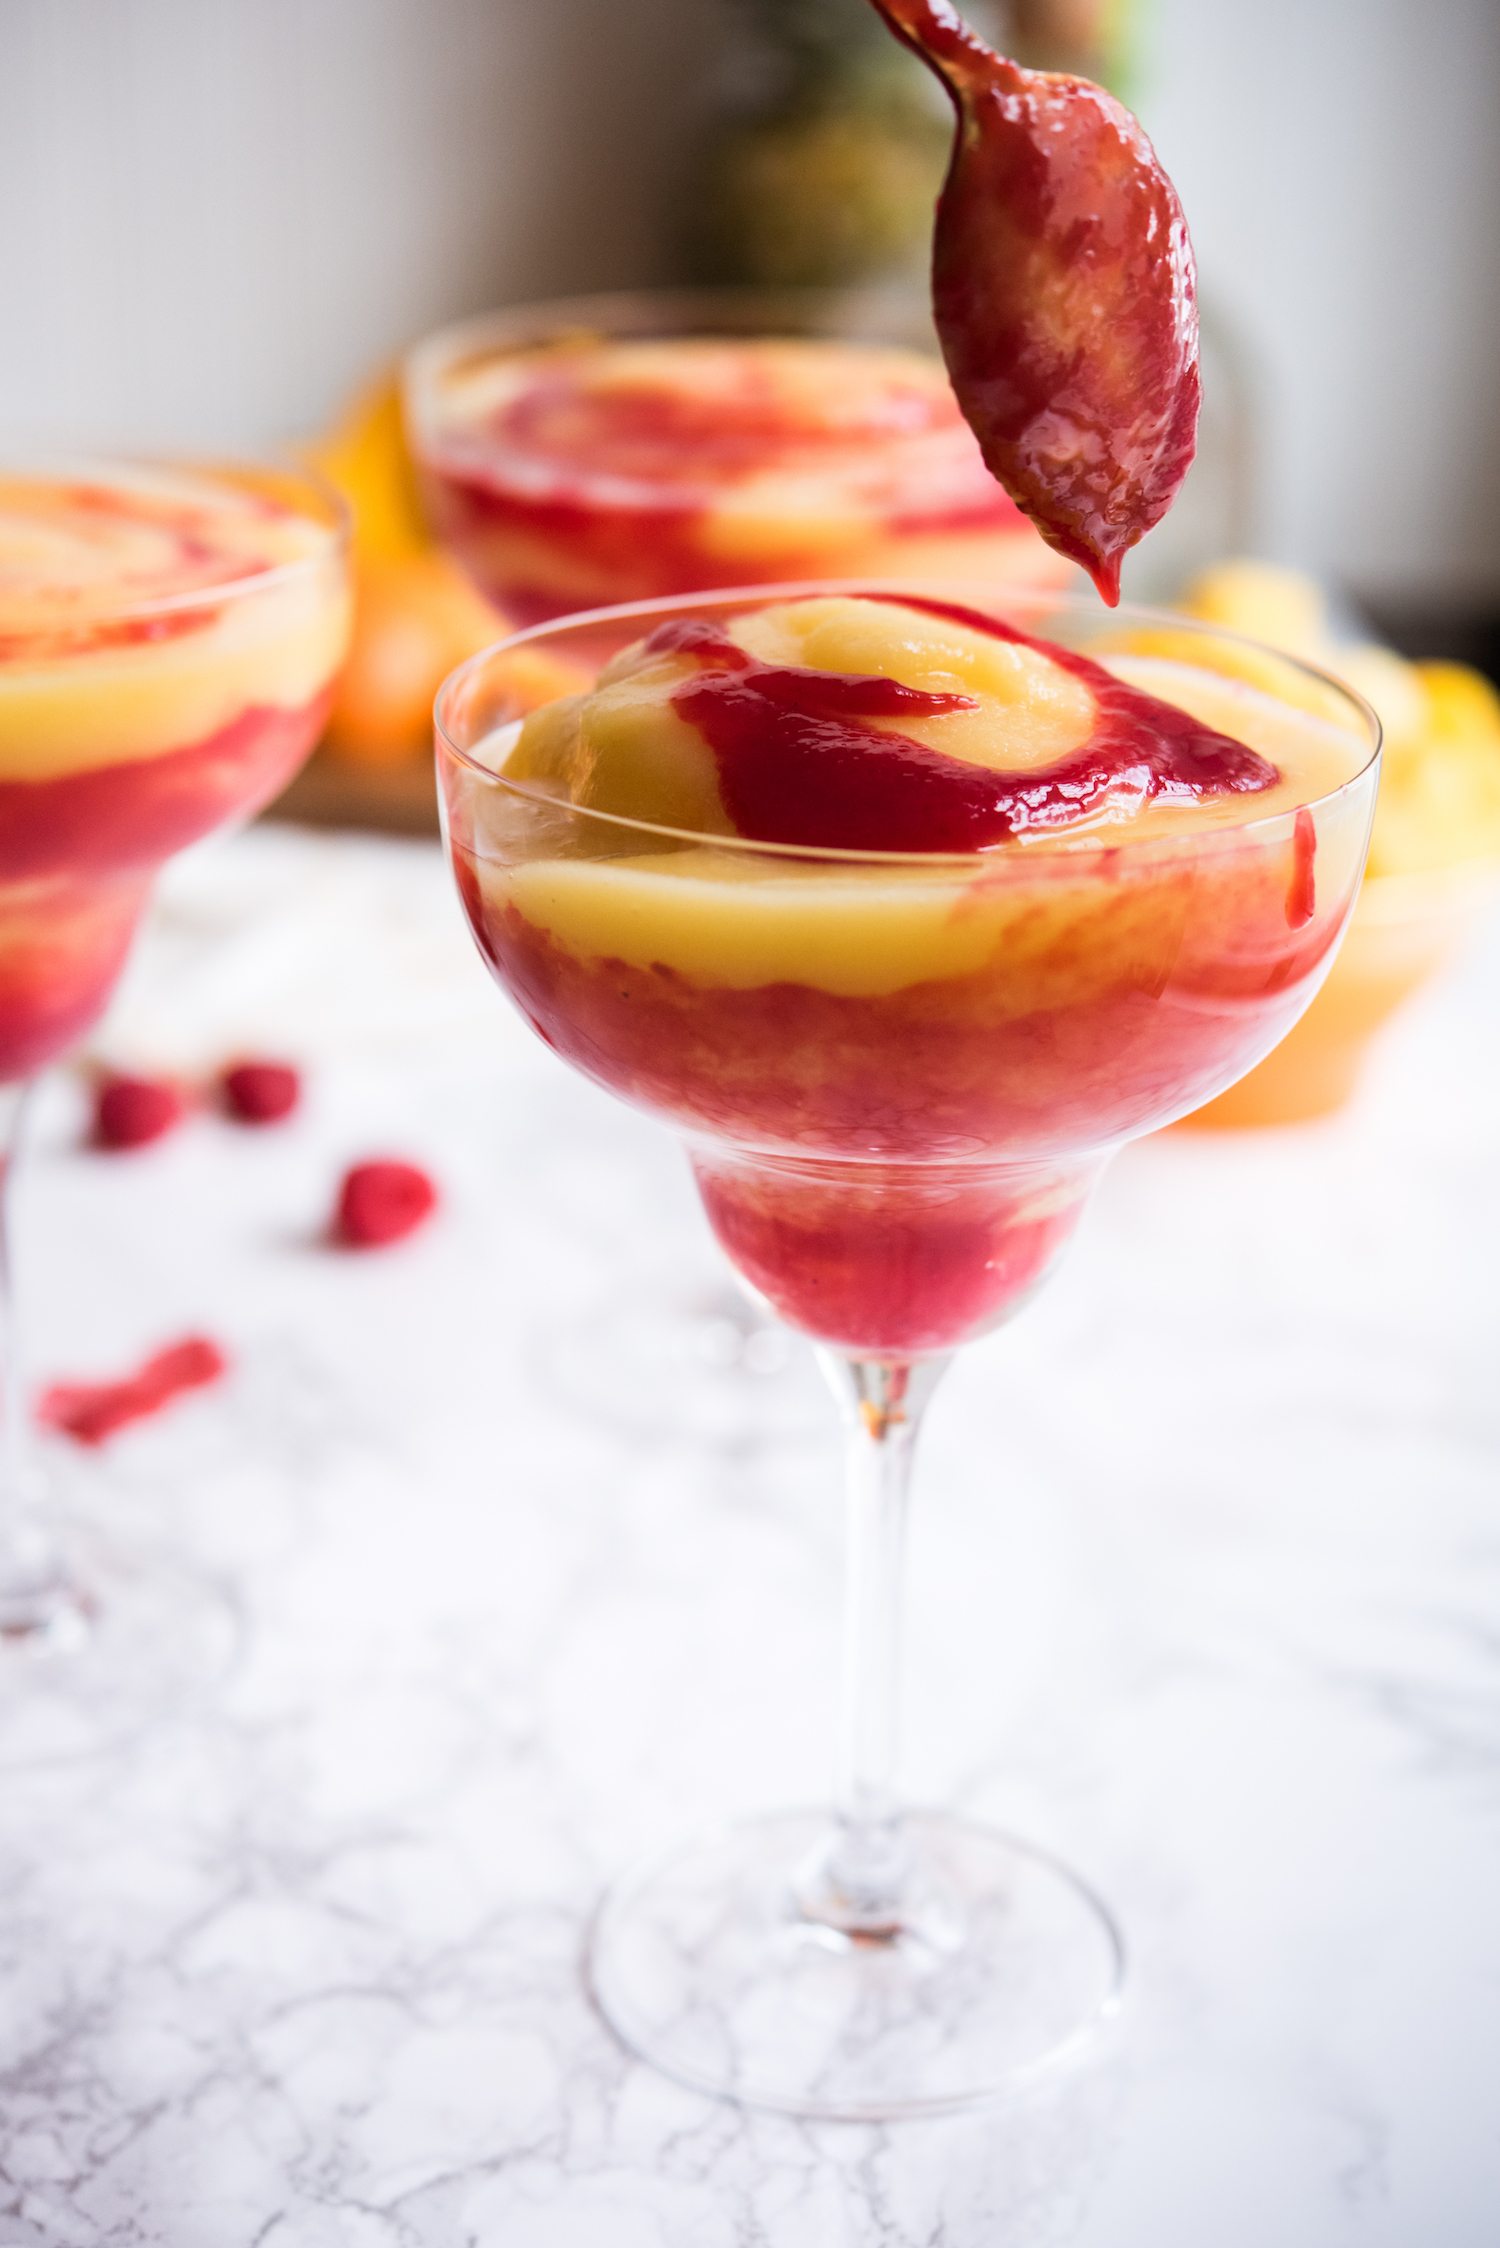 Raspberry Swirl Pineapple Mango Margaritas | Entertaining tips, cocktail recipes, party recipes and more from @cydconverse